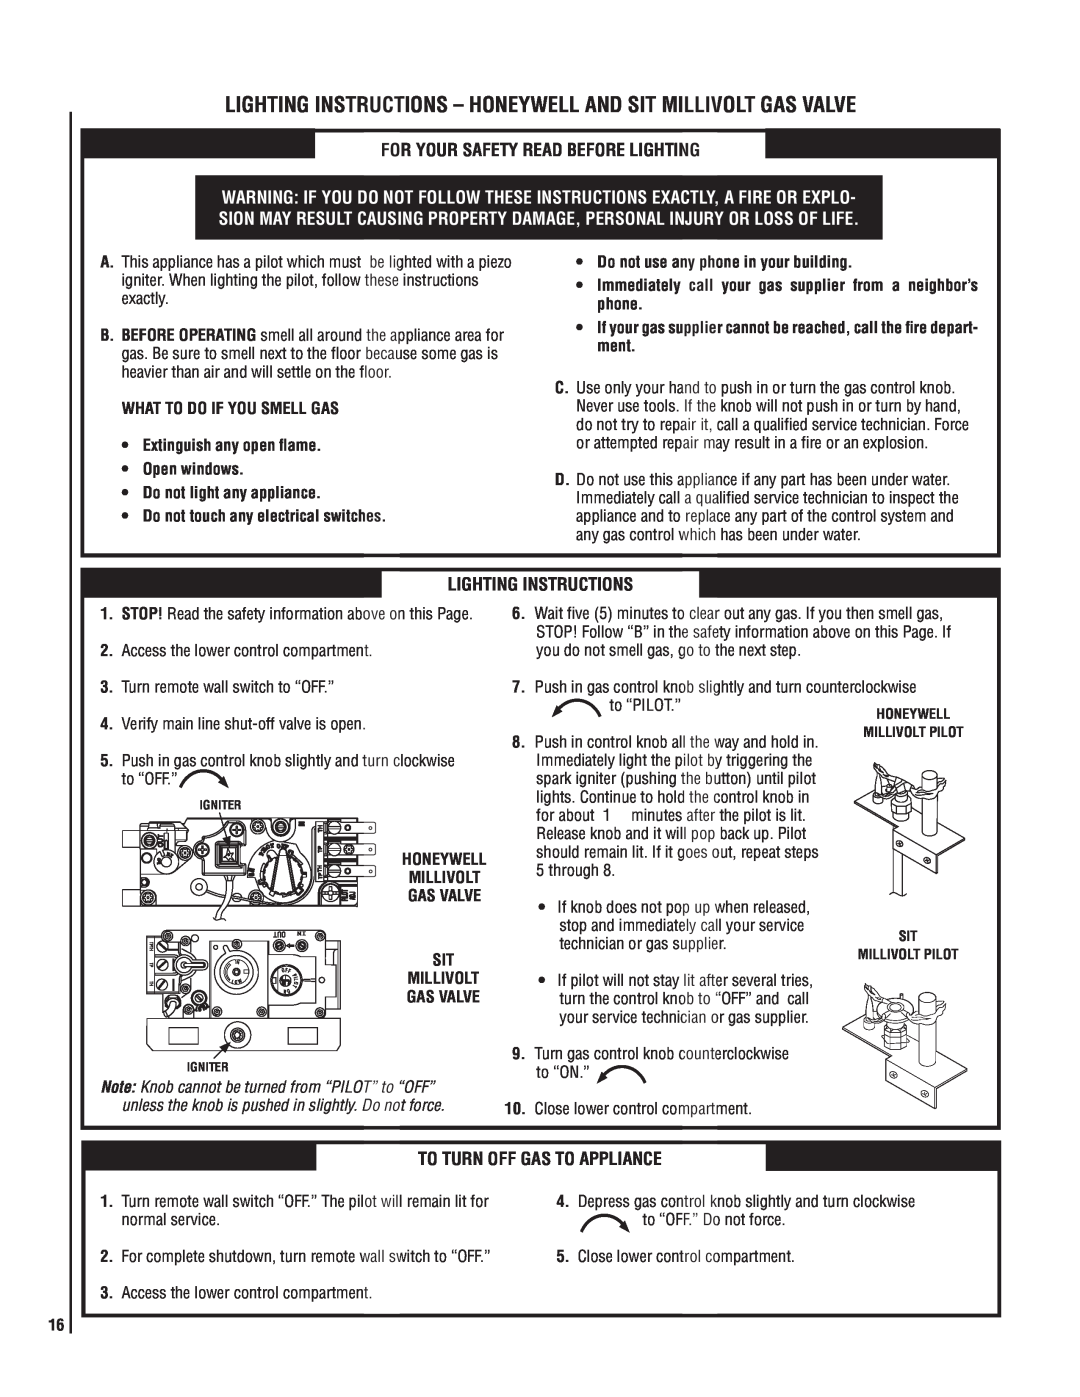 Superior SSDVT-3328CNM manual For Your Safety Read Before Lighting, Lighting Instructions, To Turn Off Gas To Appliance 